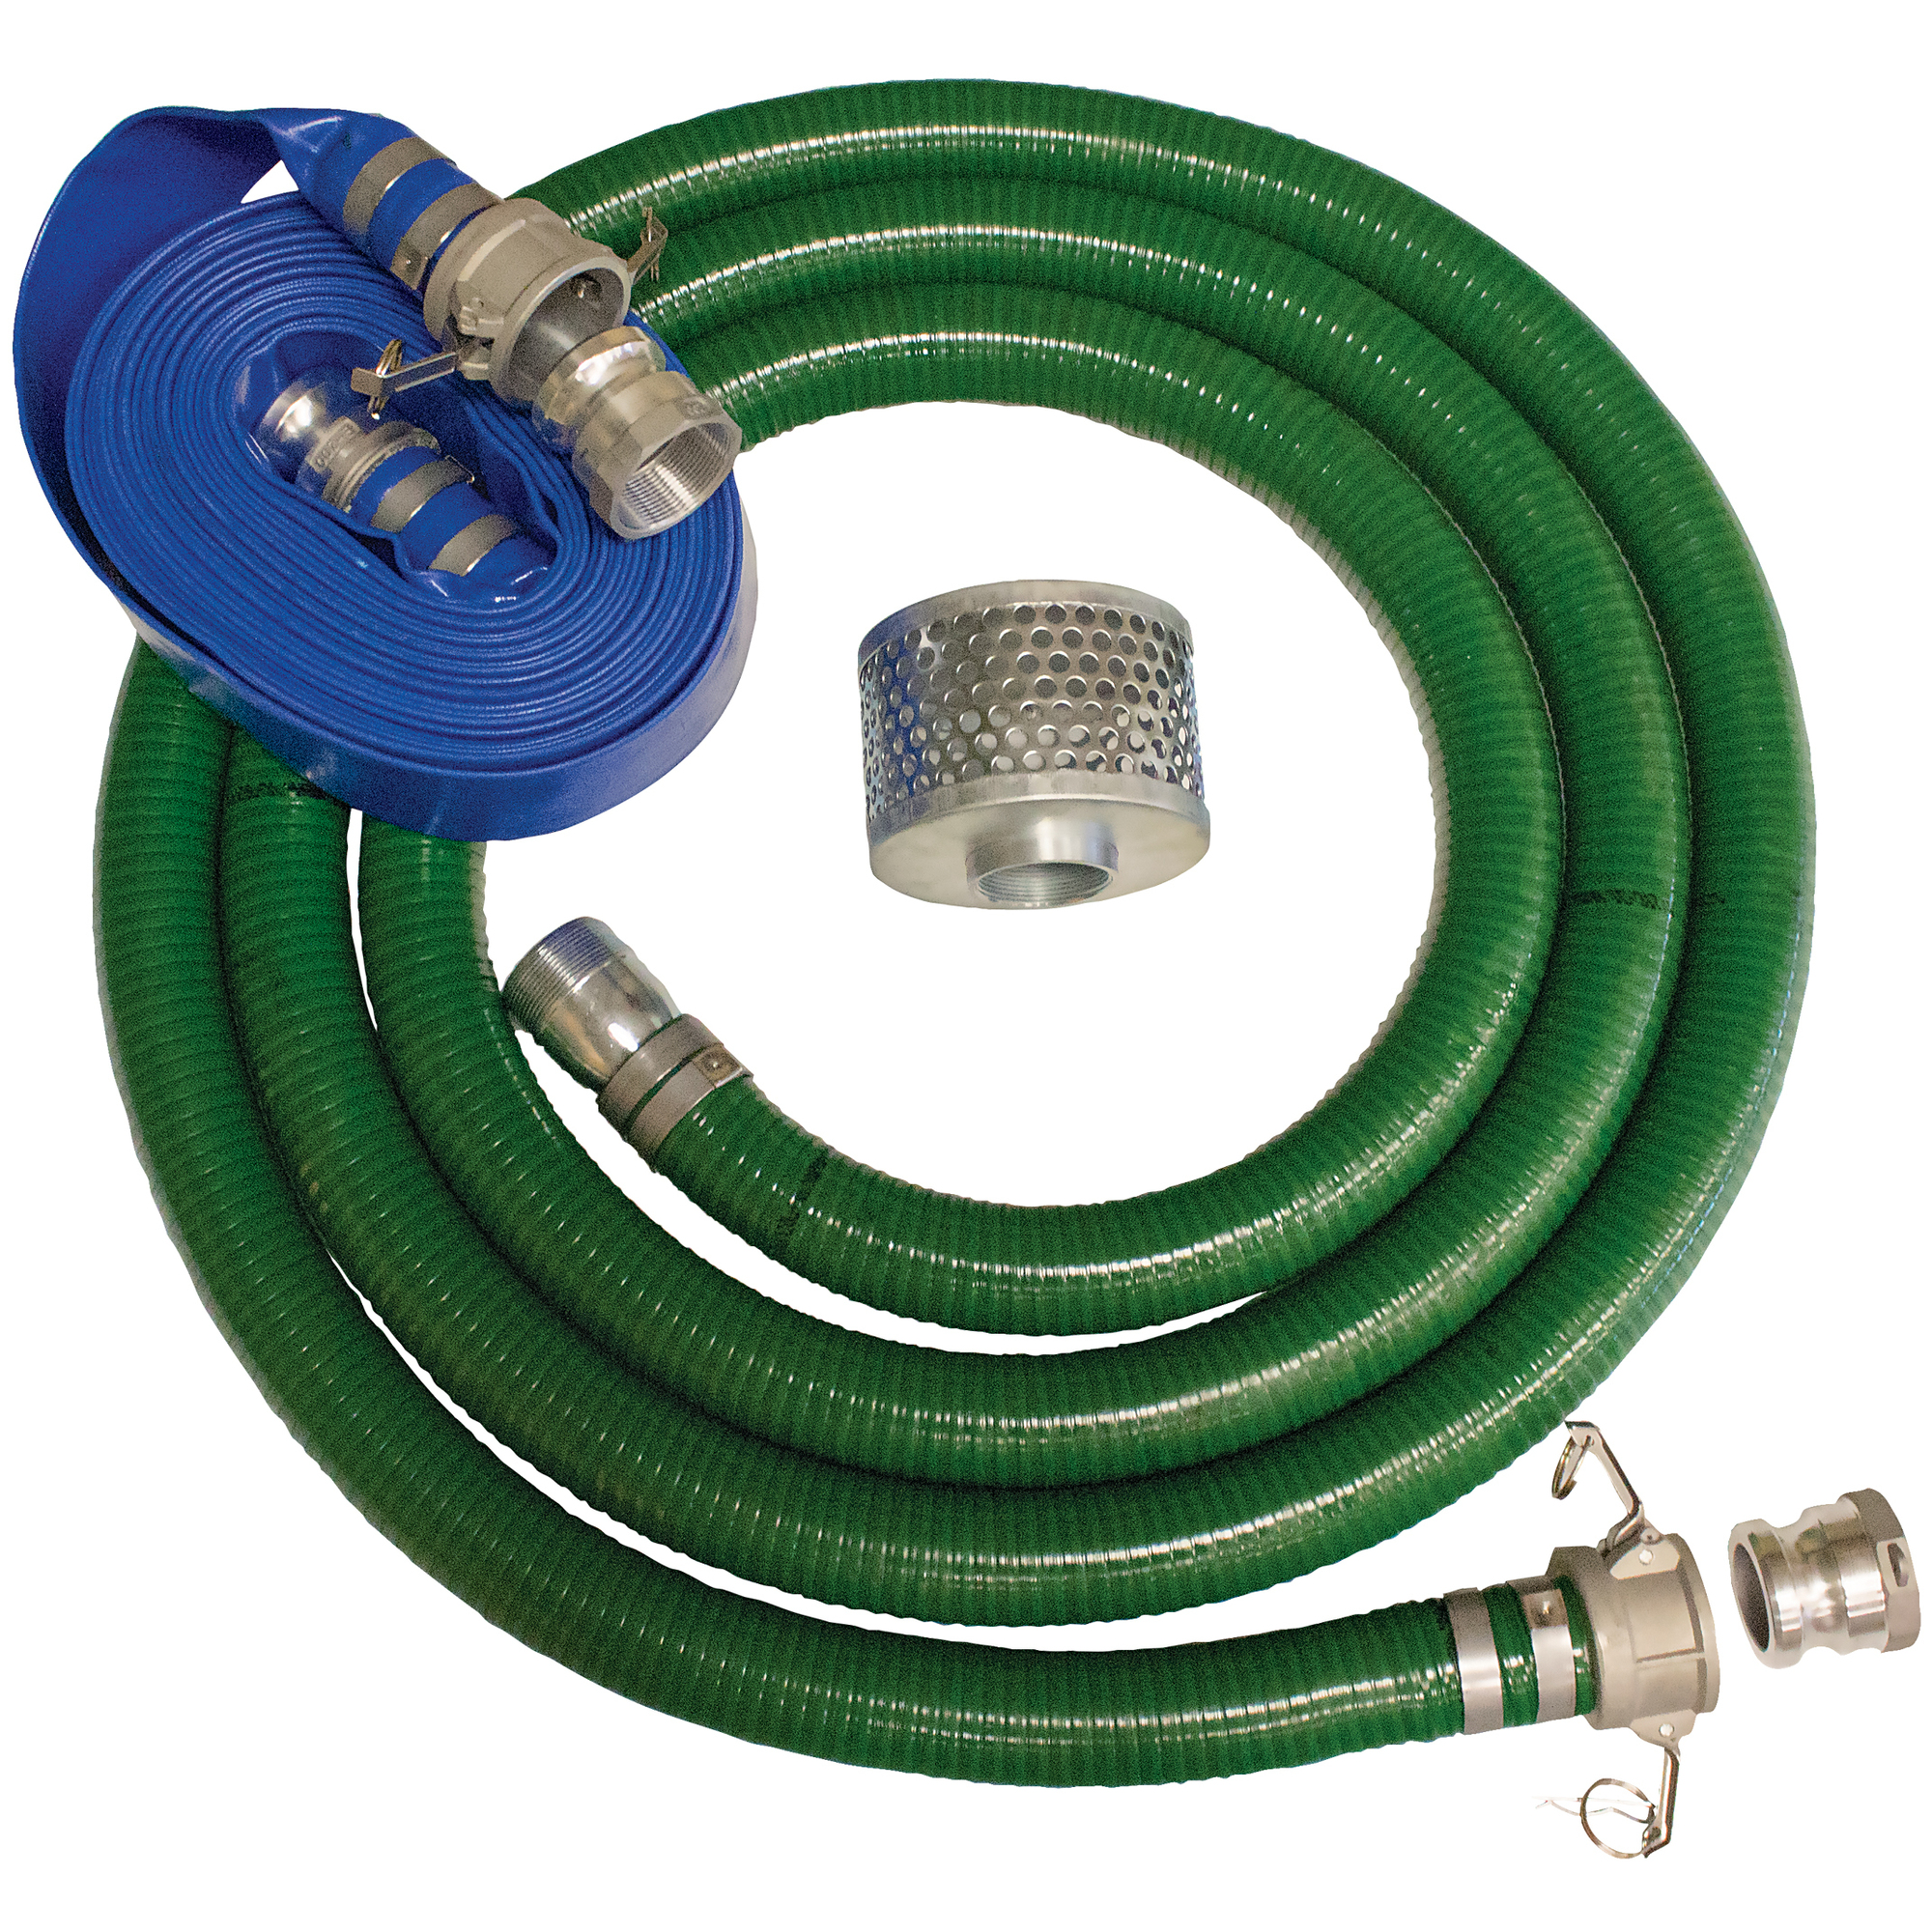 Brave, 4Inch Hose Kit with 20ft. intake and 50ft. discharge, Hose Diameter 4 in, Hose Length 0 ft, Max. PSI 65, Model BRHK4